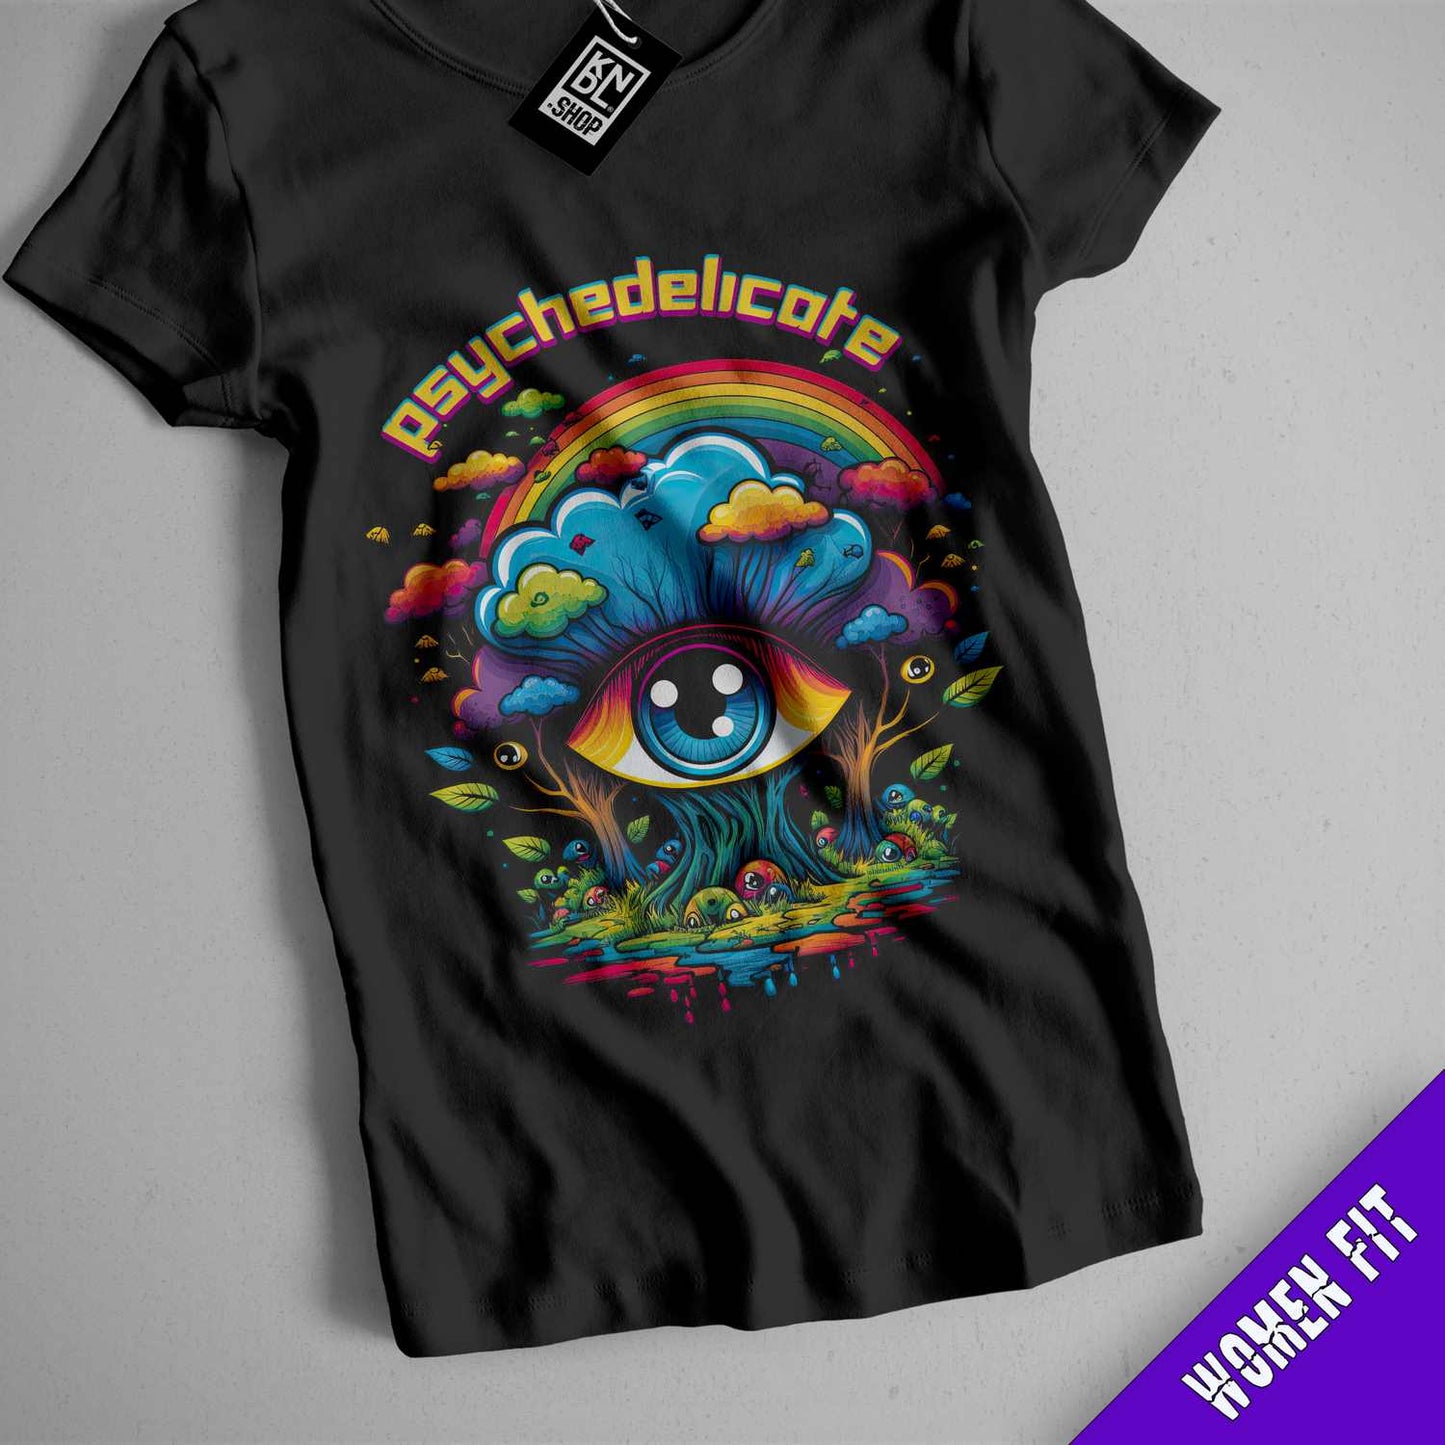 a black t - shirt with a psychedelic eye on it